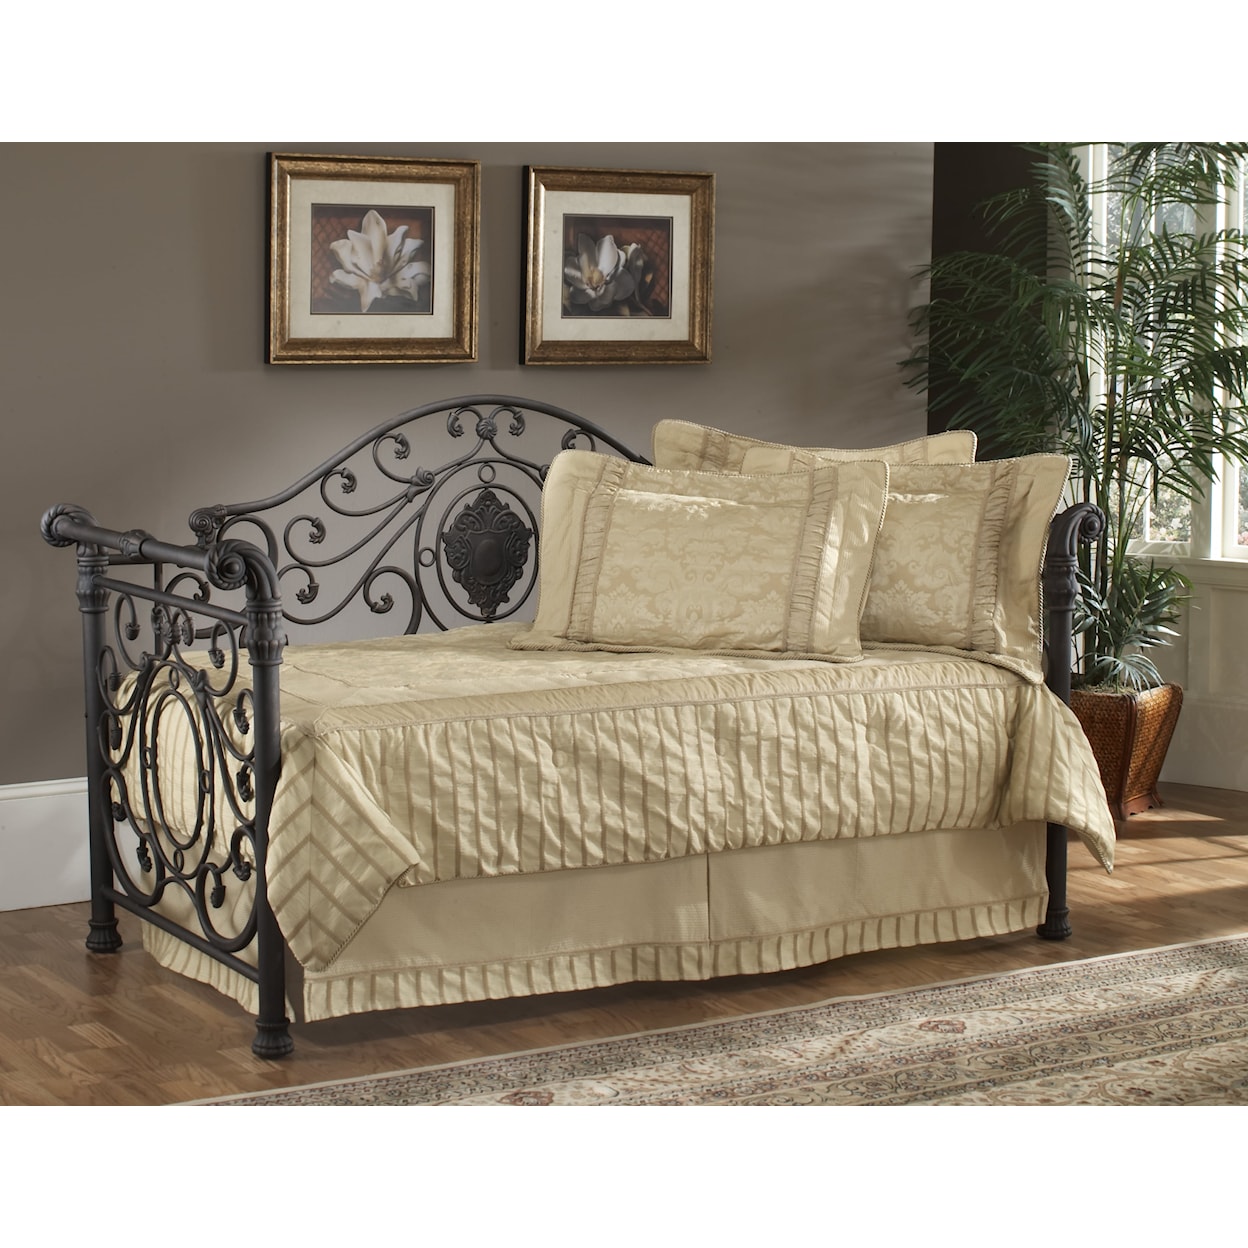 Hillsdale Mercer Twin Daybed